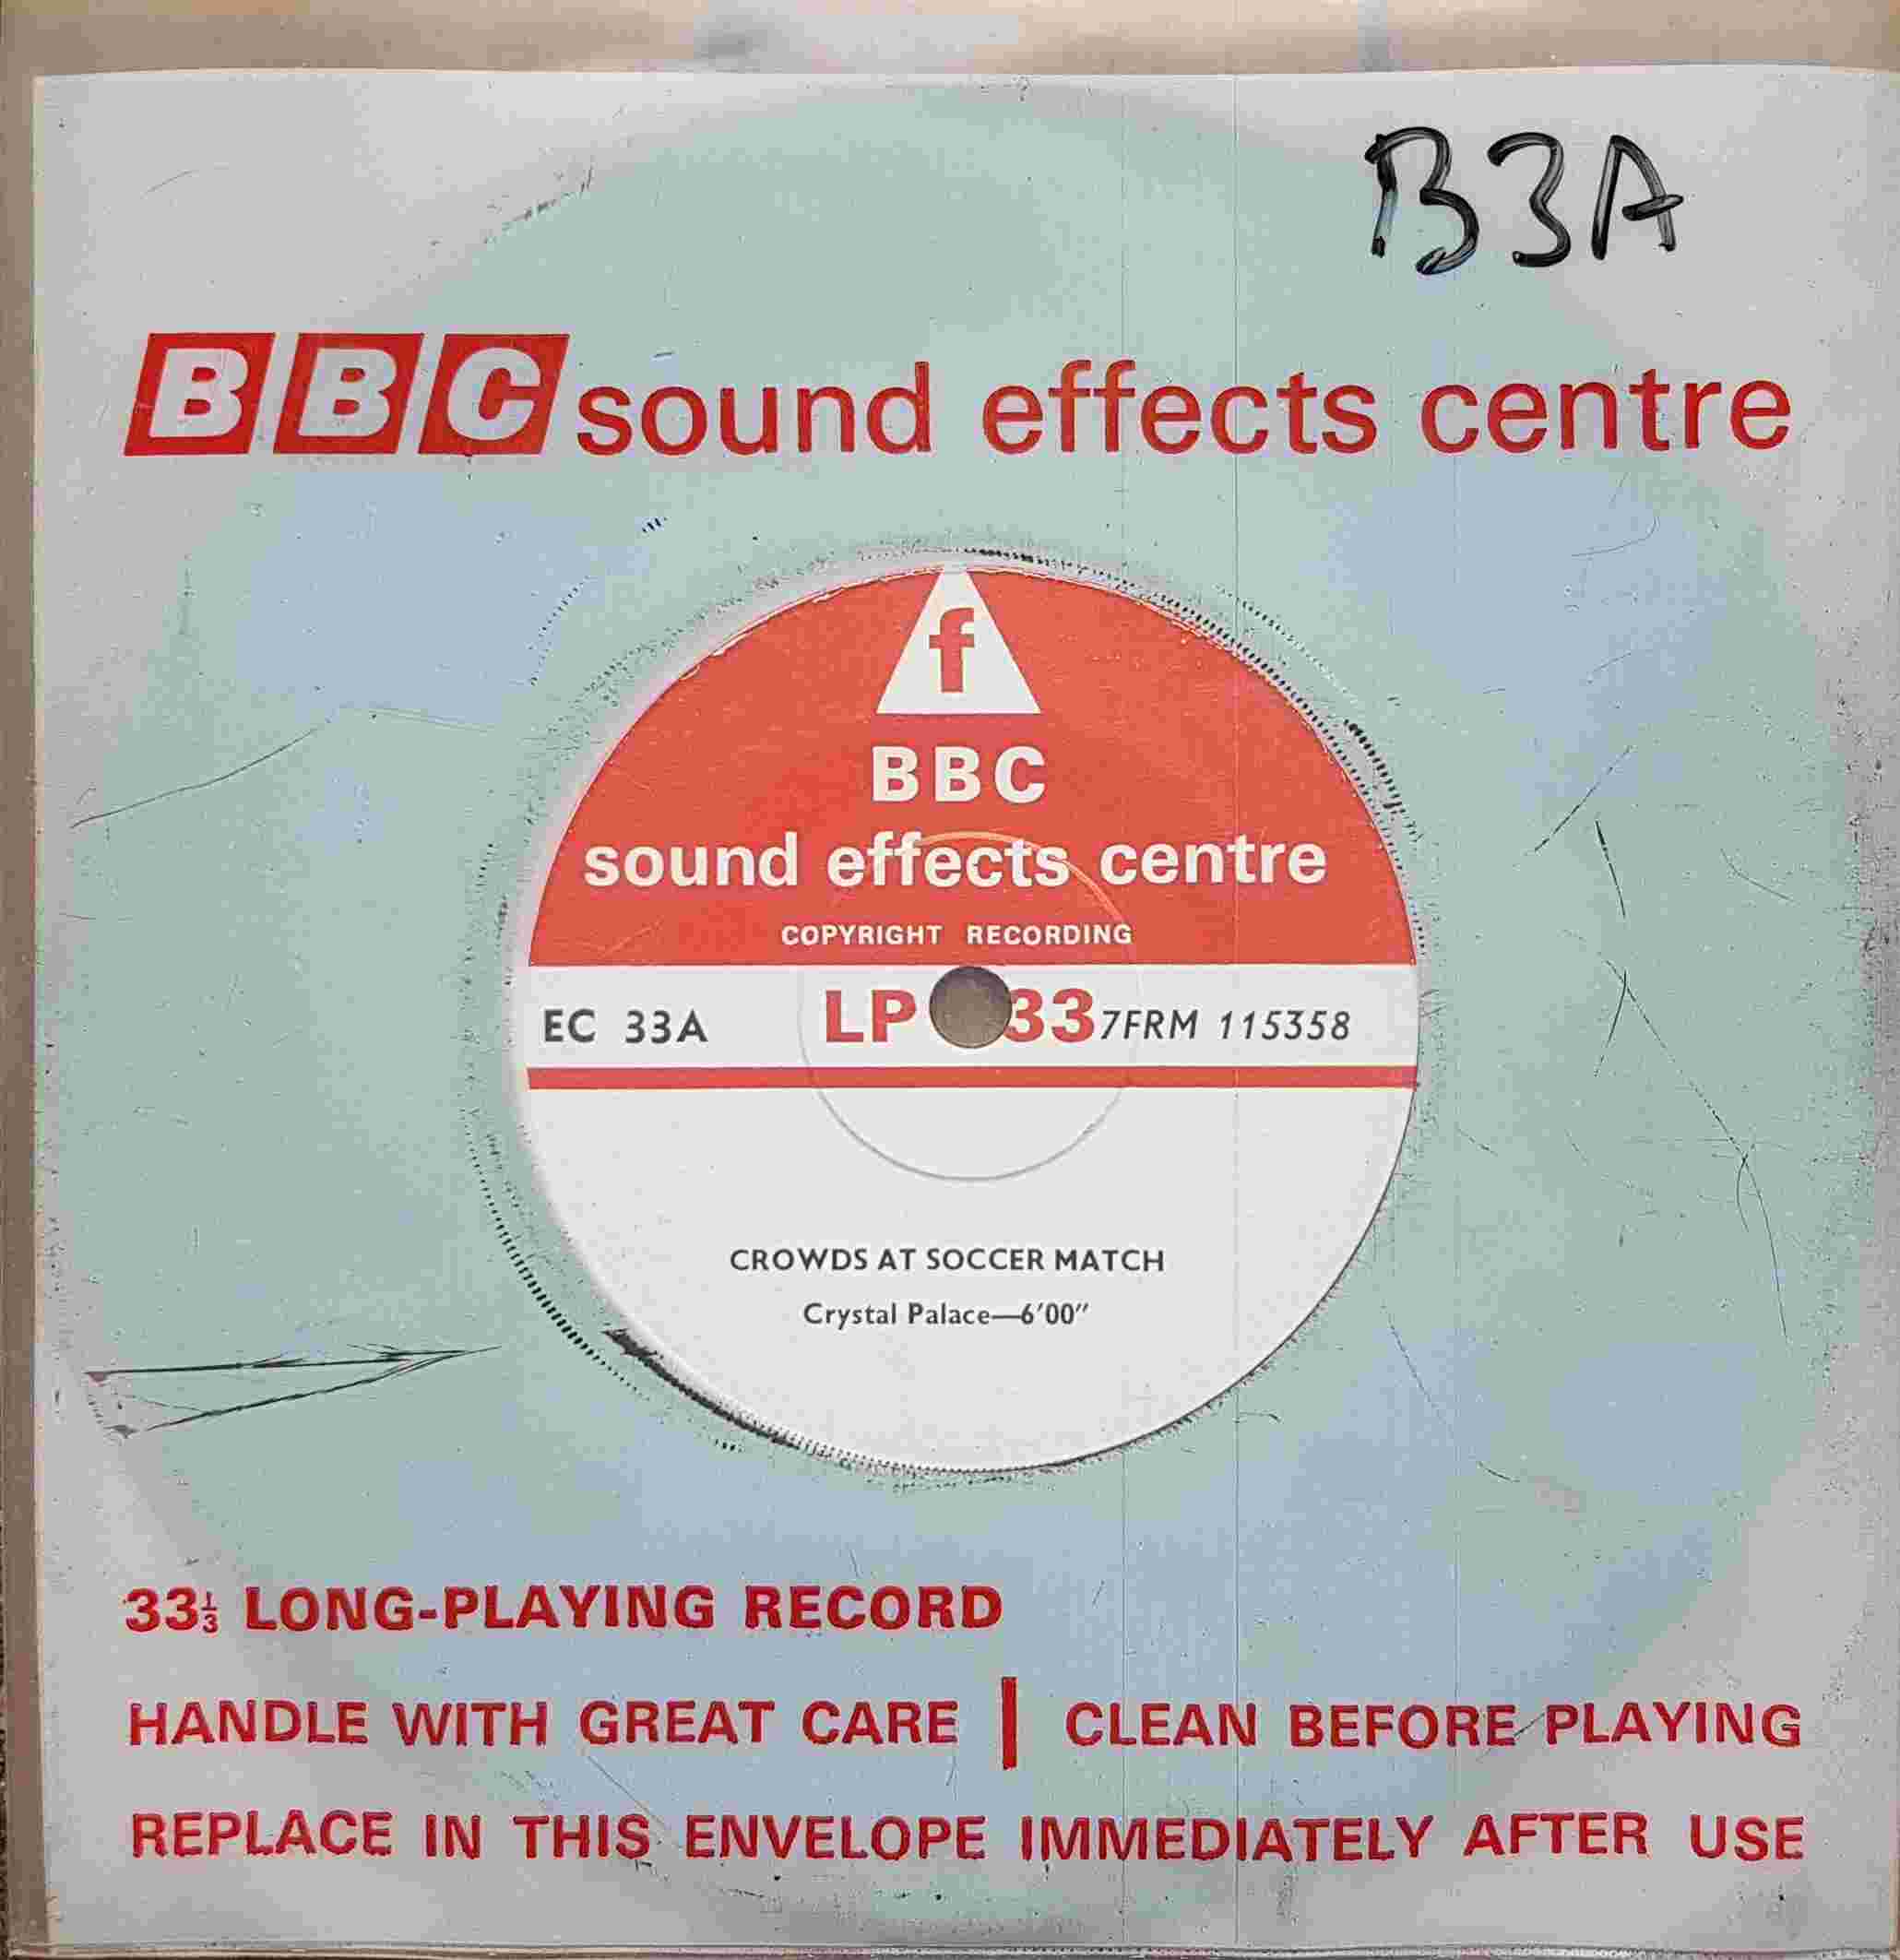 Picture of EC 33A Crowds by artist Not registered from the BBC records and Tapes library